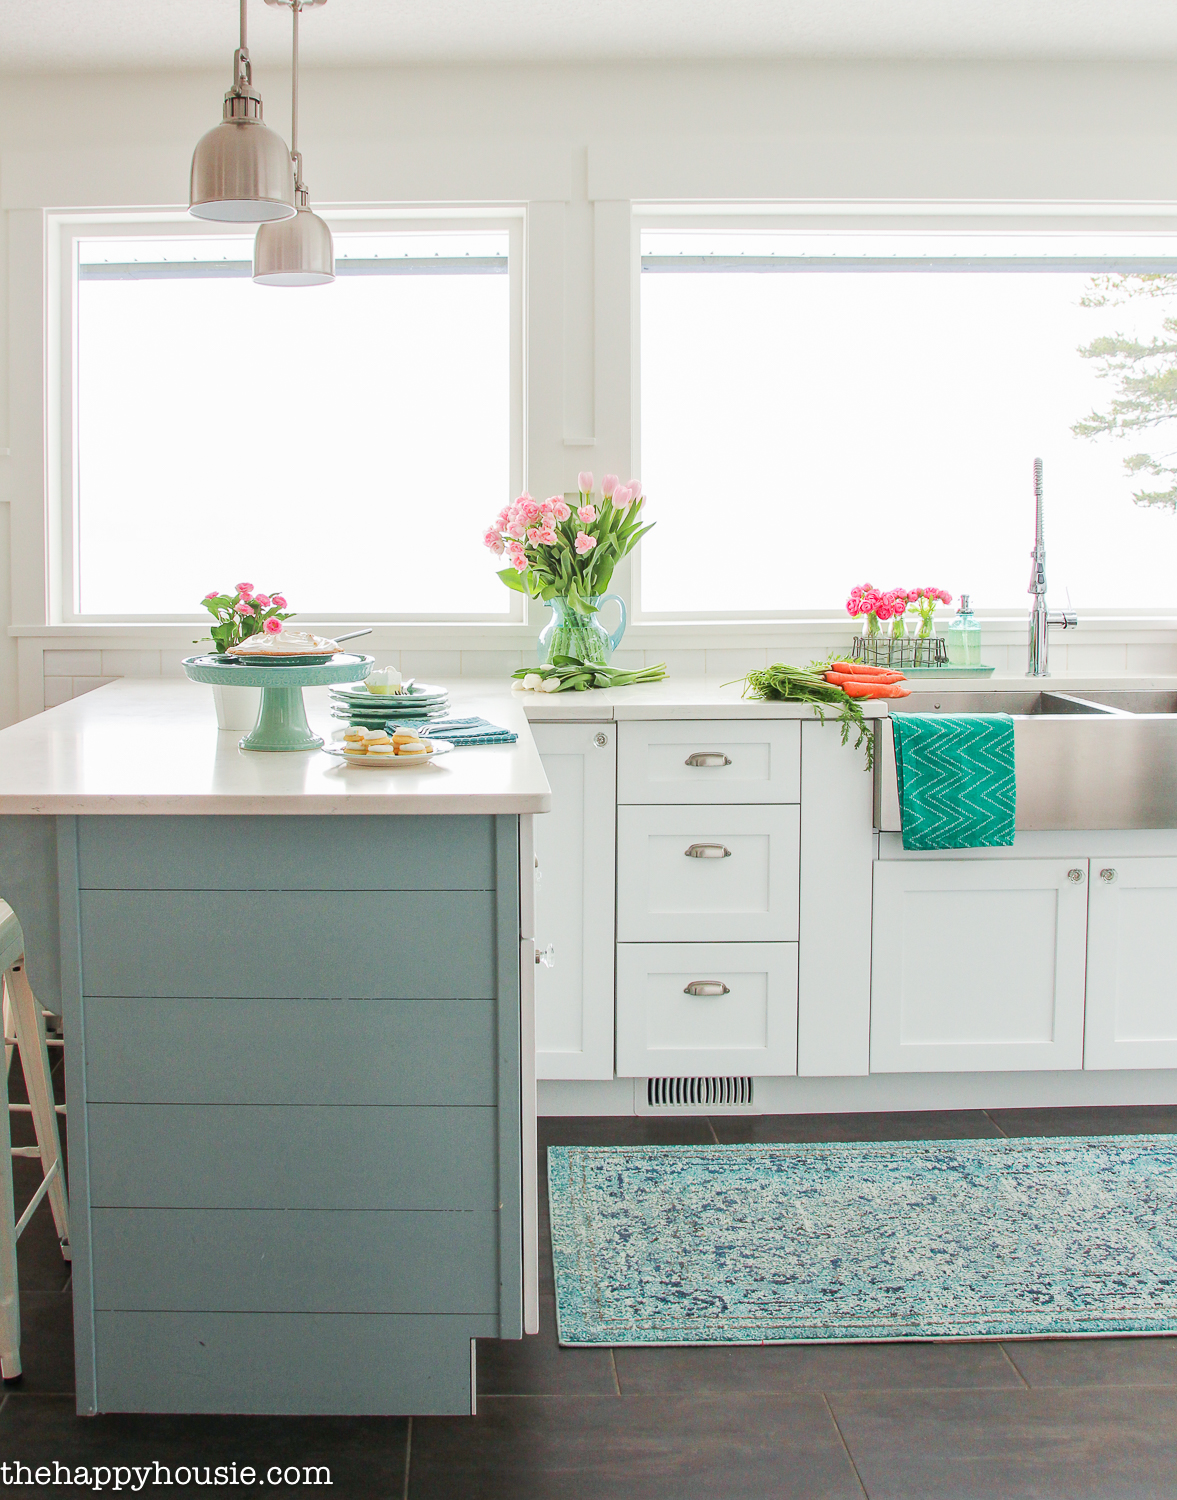 White kitchen cabinets with a soft blue island and spring flowers on the counters.